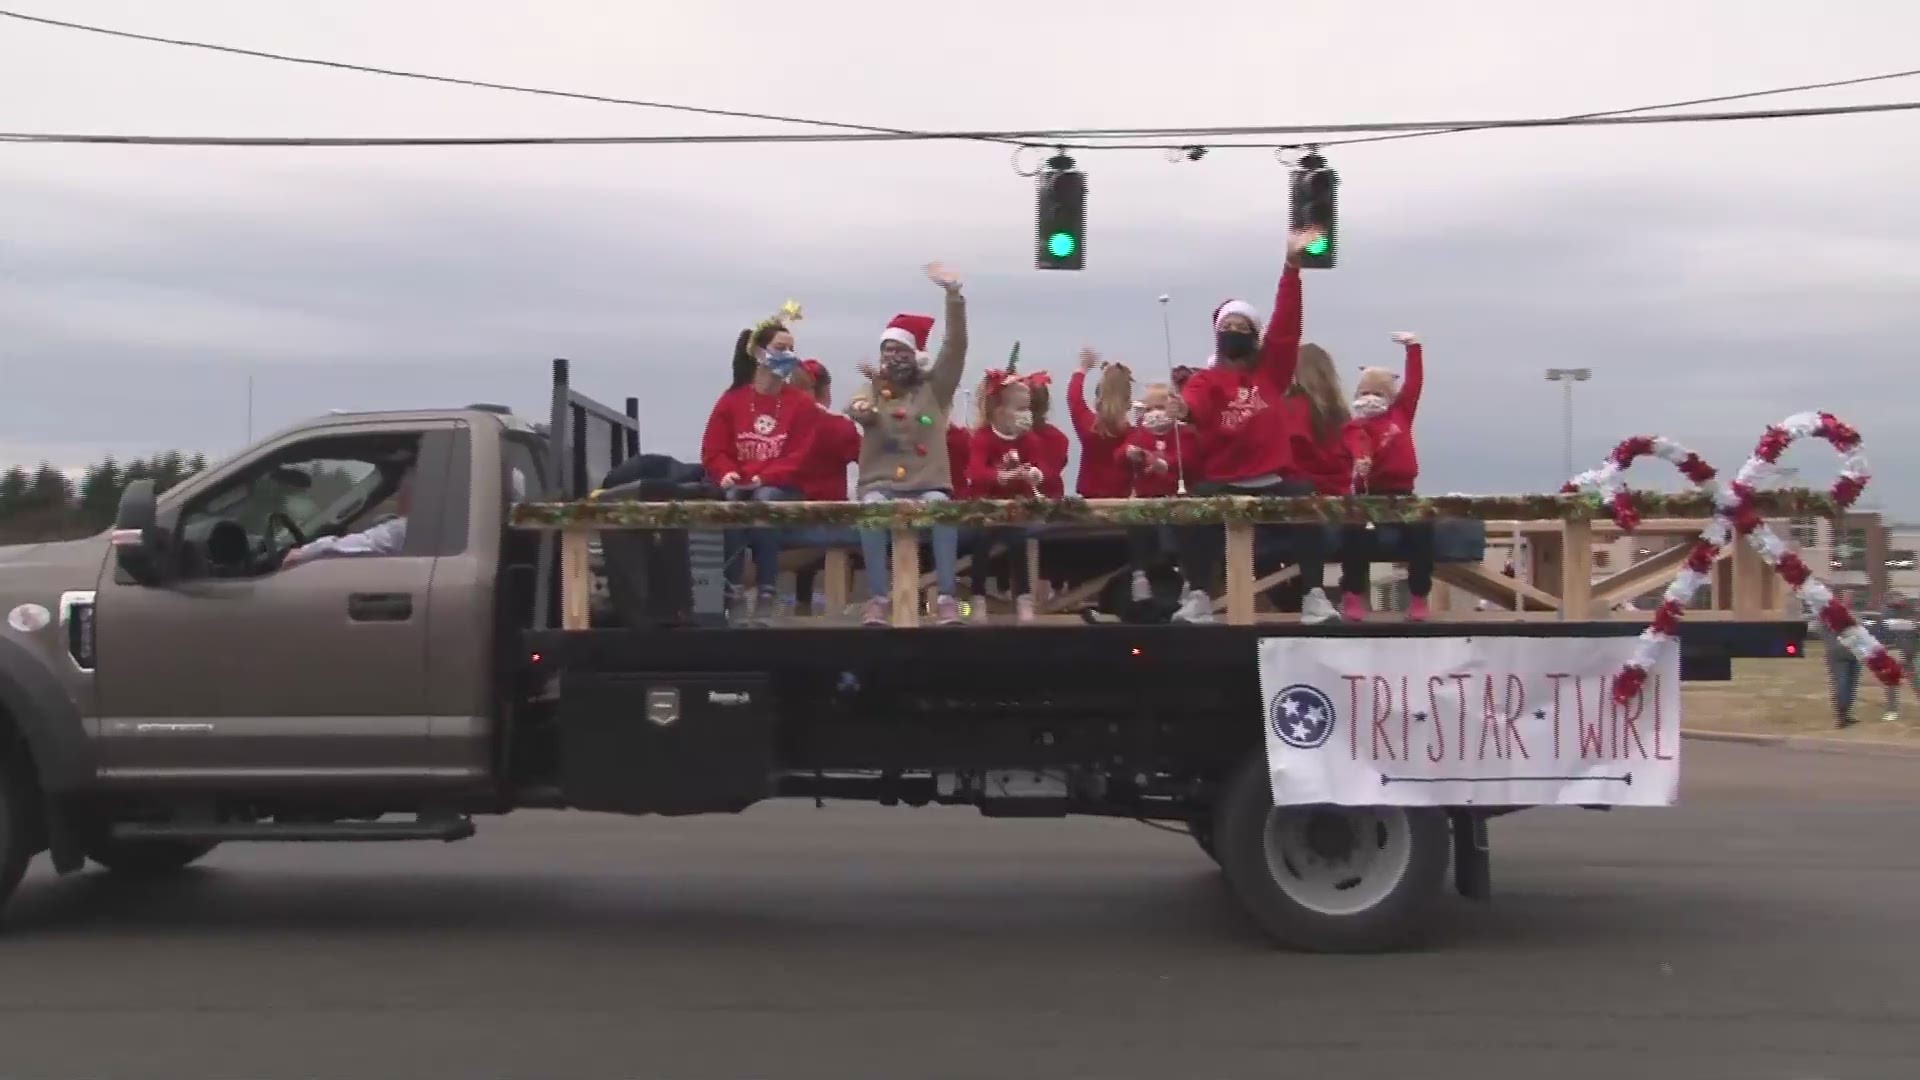 While many East Tennessee parades were canceled over COVID-19 concerns, the Karns parade went on as planned.